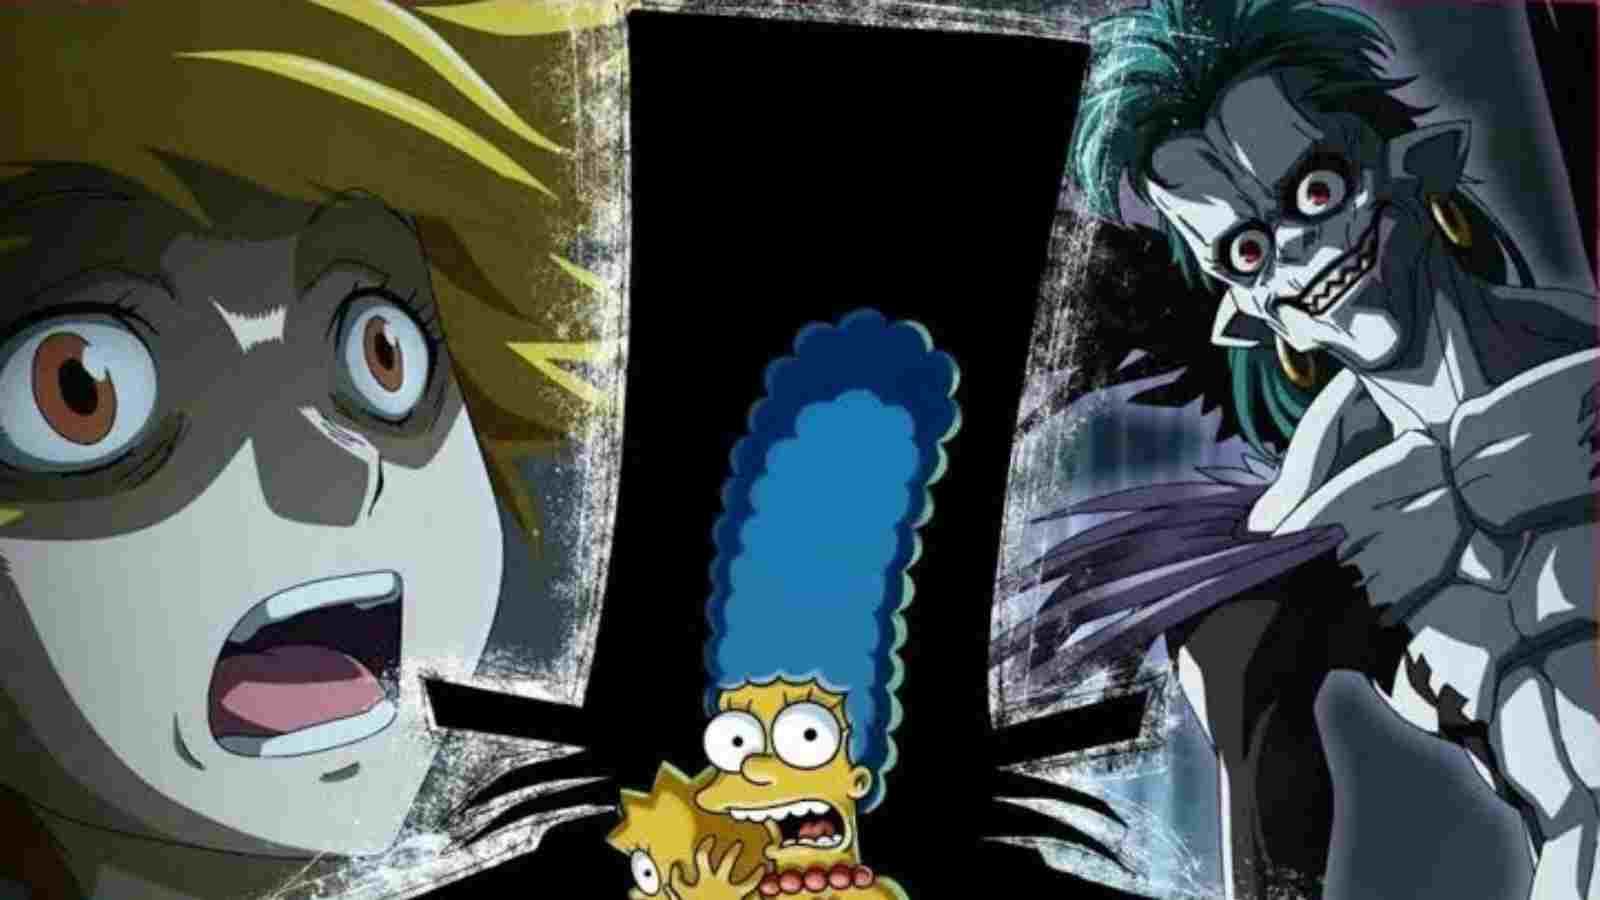 The Simpsons Anime Makeover for Treehouse Of Horror XXXIII Death Note  shorts  YouTube